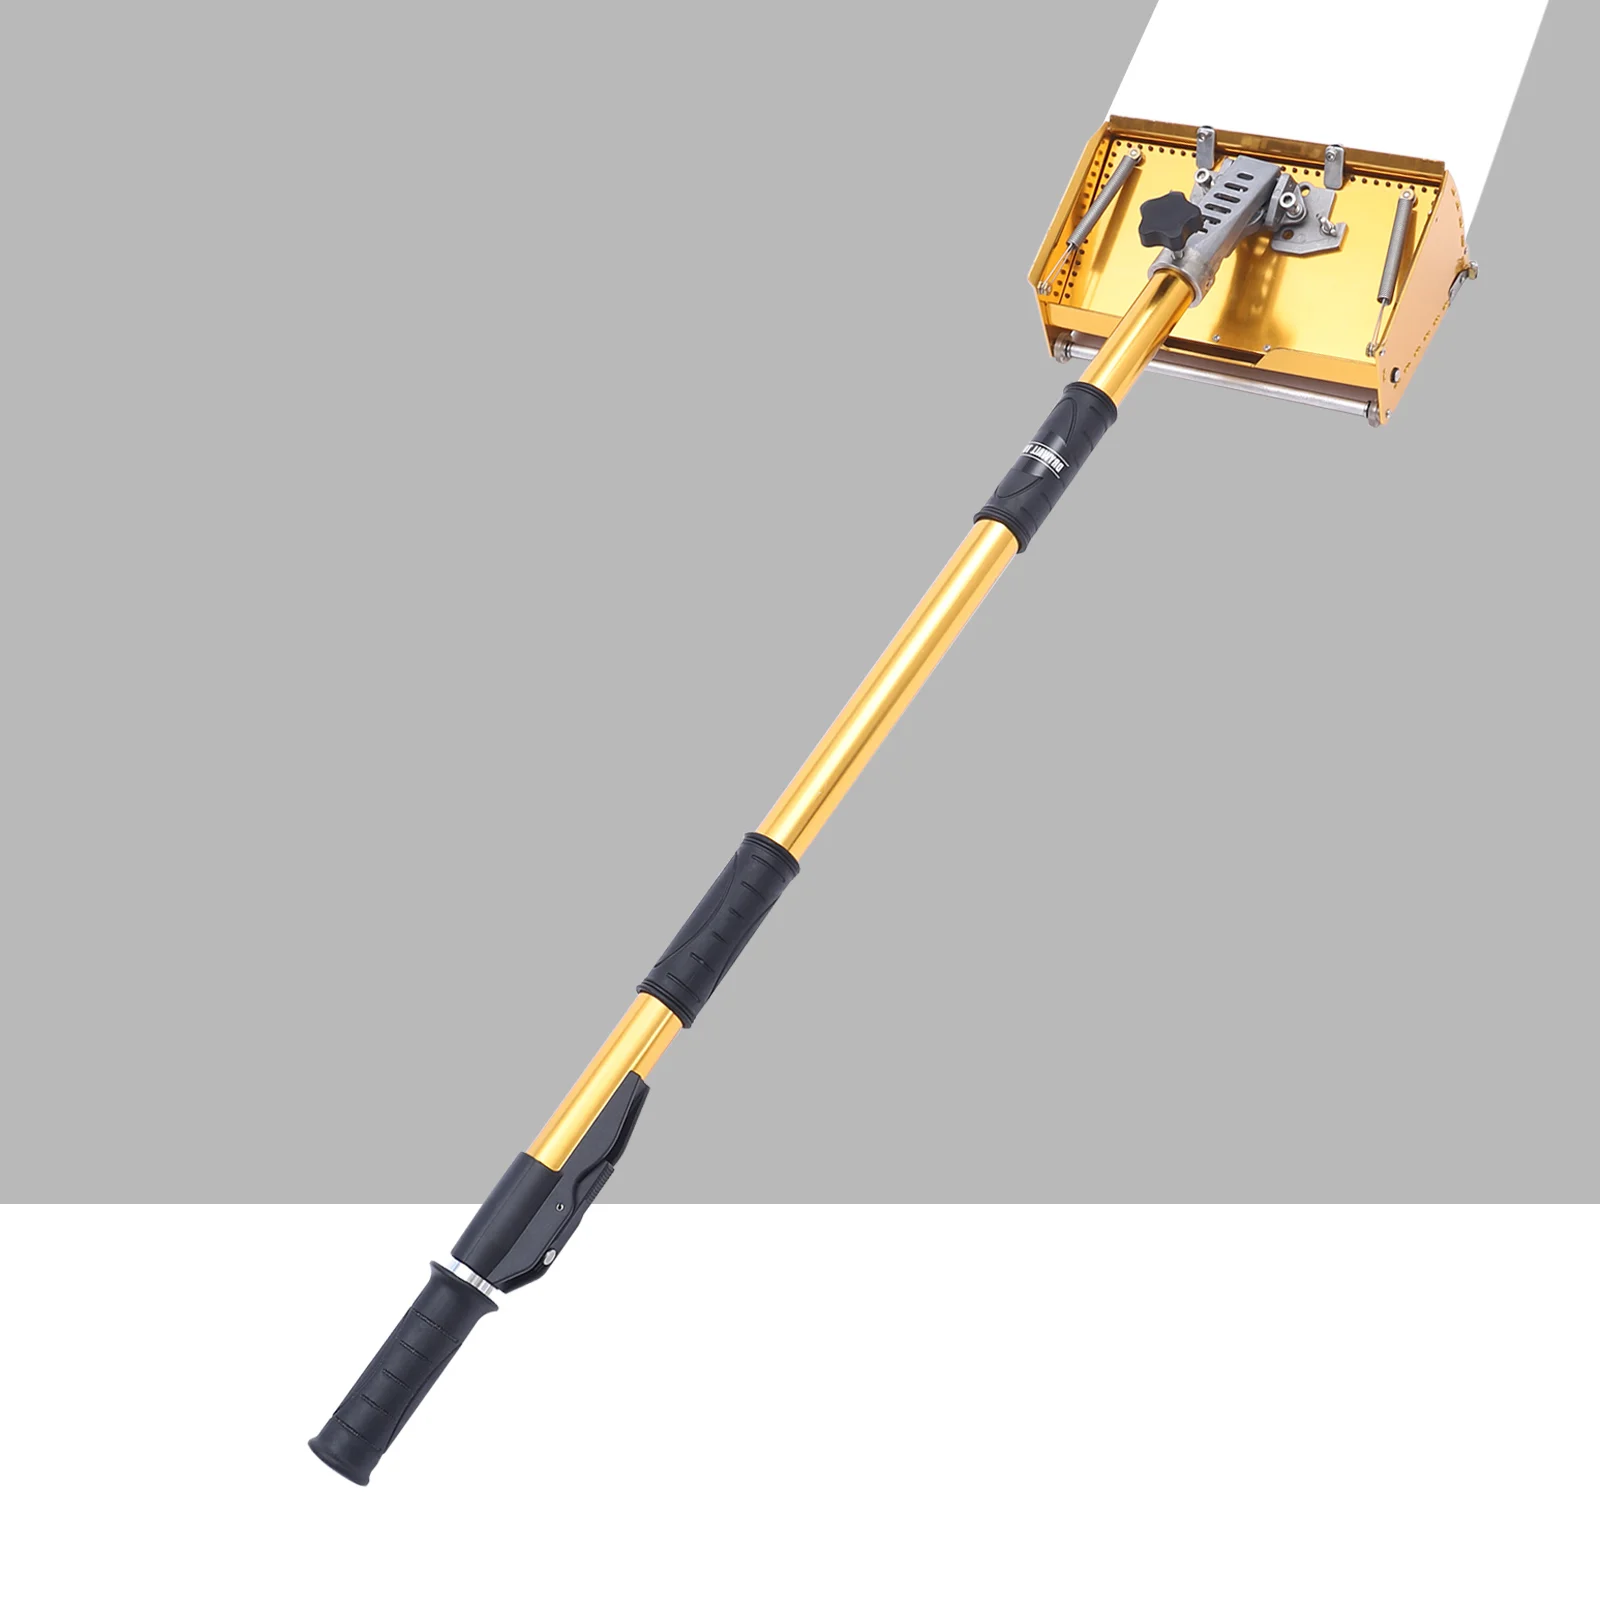 Smooth Finishing Professional Drywall Flat  Box Gold-Flat Handle-Aluminum Precision Tools-Drywall Sheetrock Cleanable